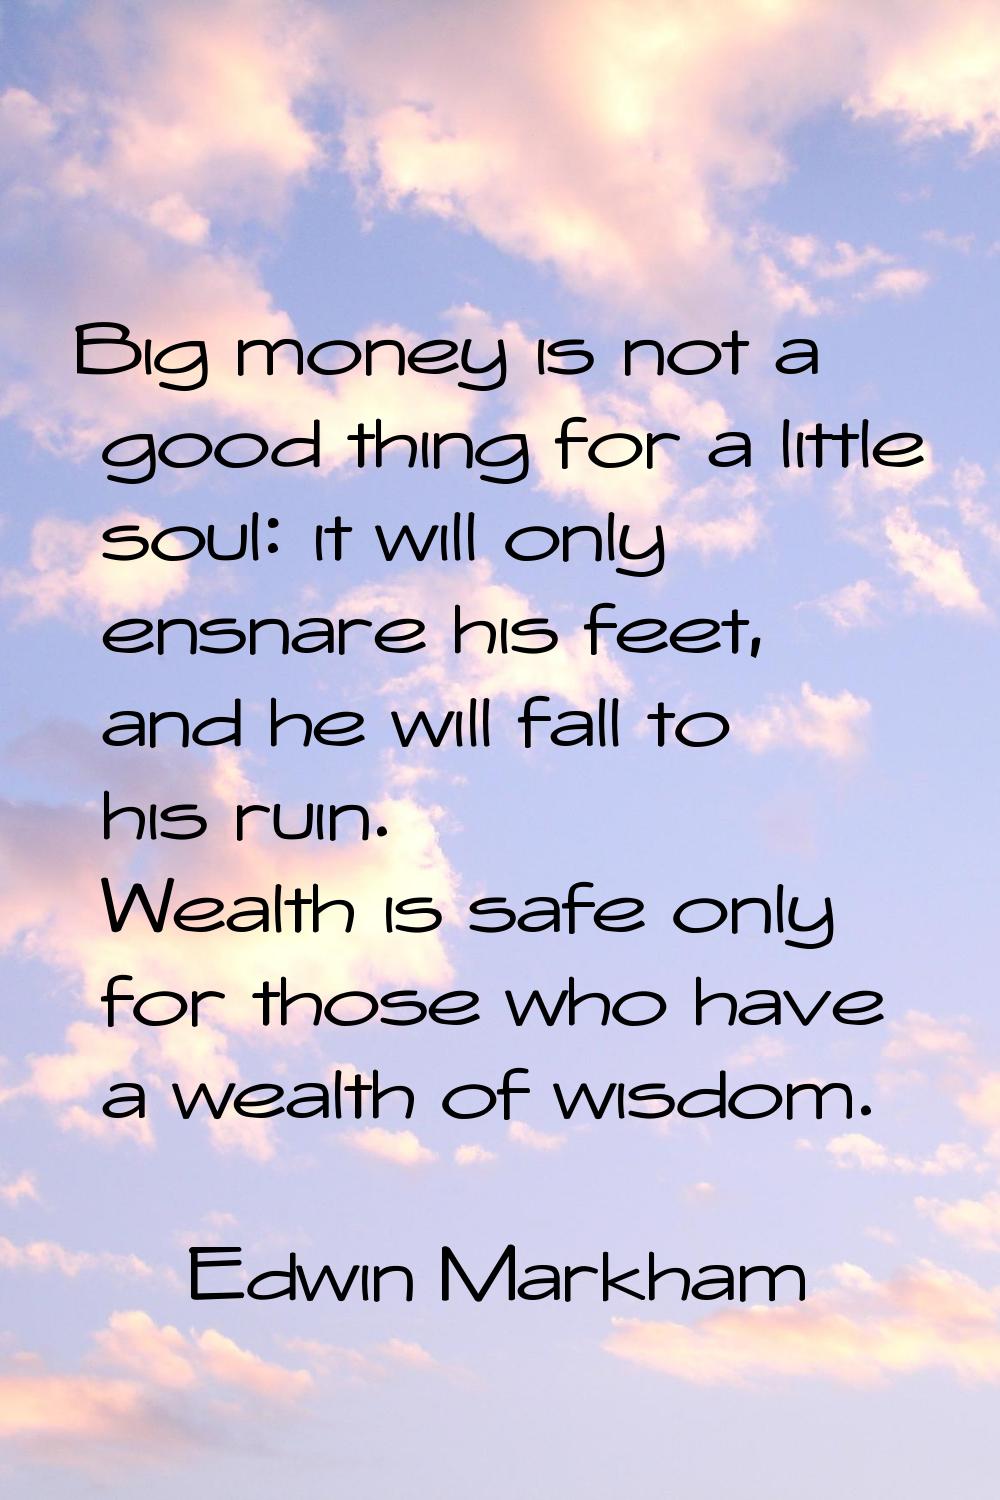 Big money is not a good thing for a little soul: it will only ensnare his feet, and he will fall to